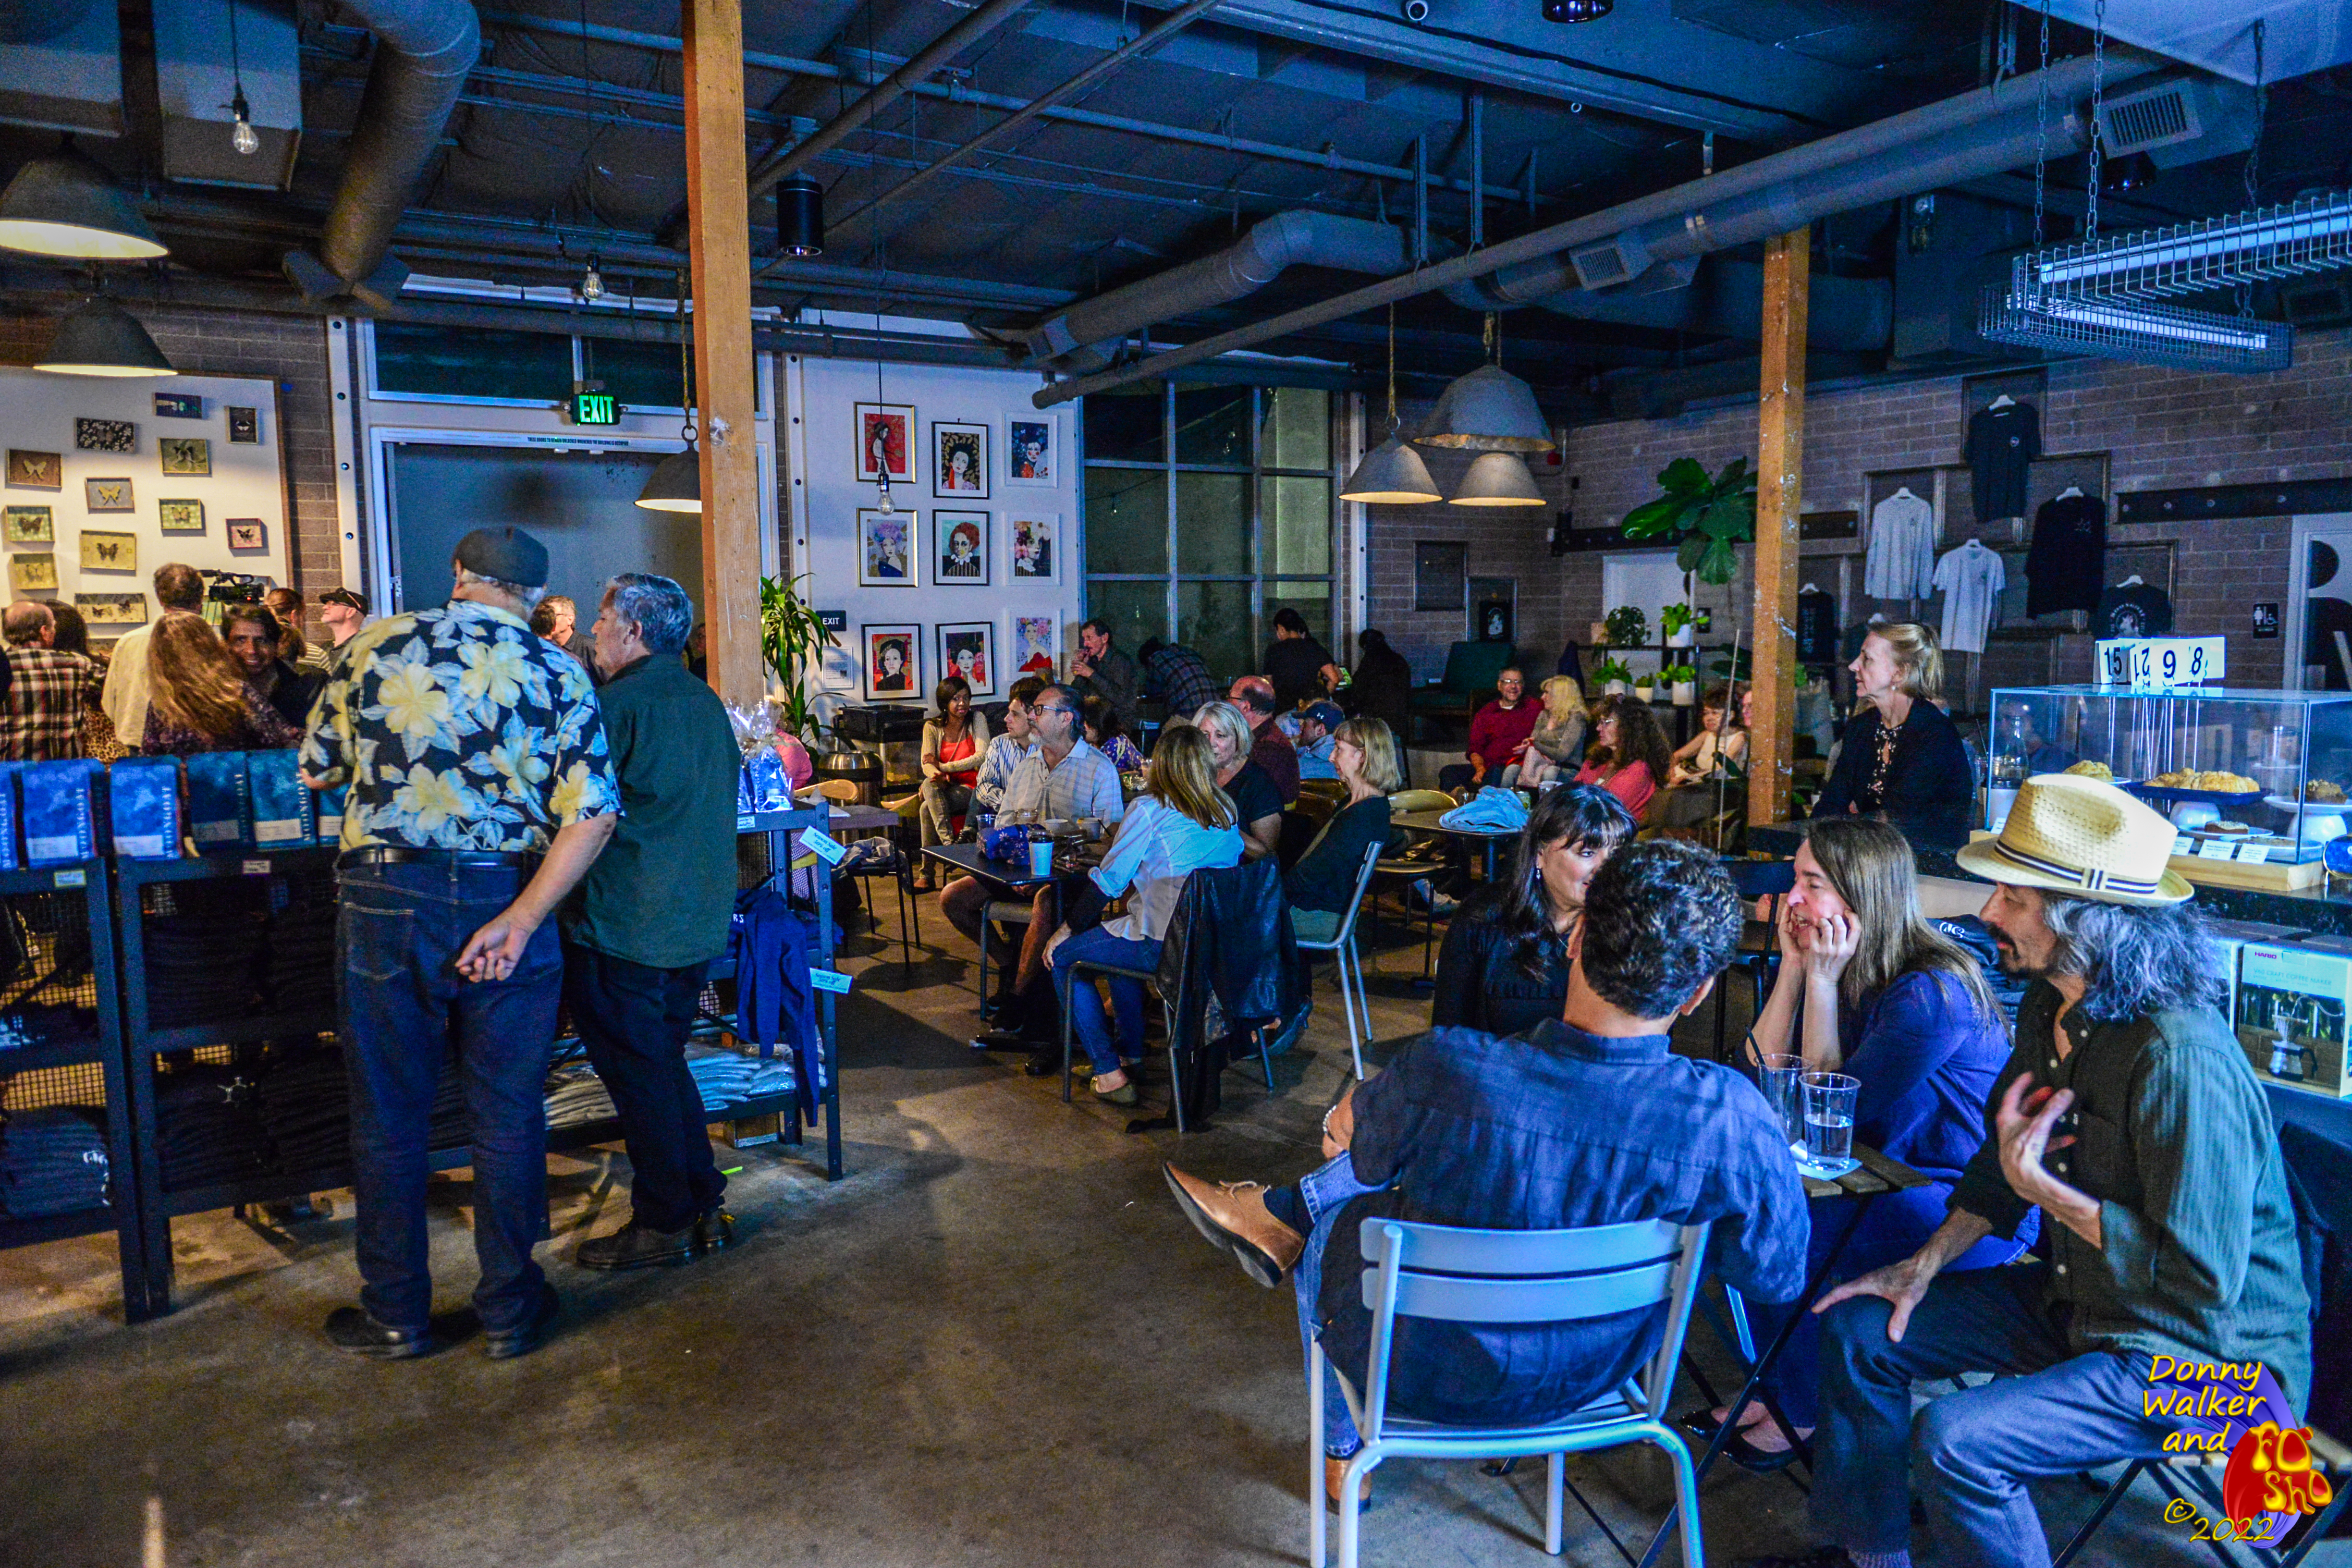 Seating area filled for Donny Walker and Fo'sho at MoonGoat Coffee Roasters in Costa Mesa 4/23/22